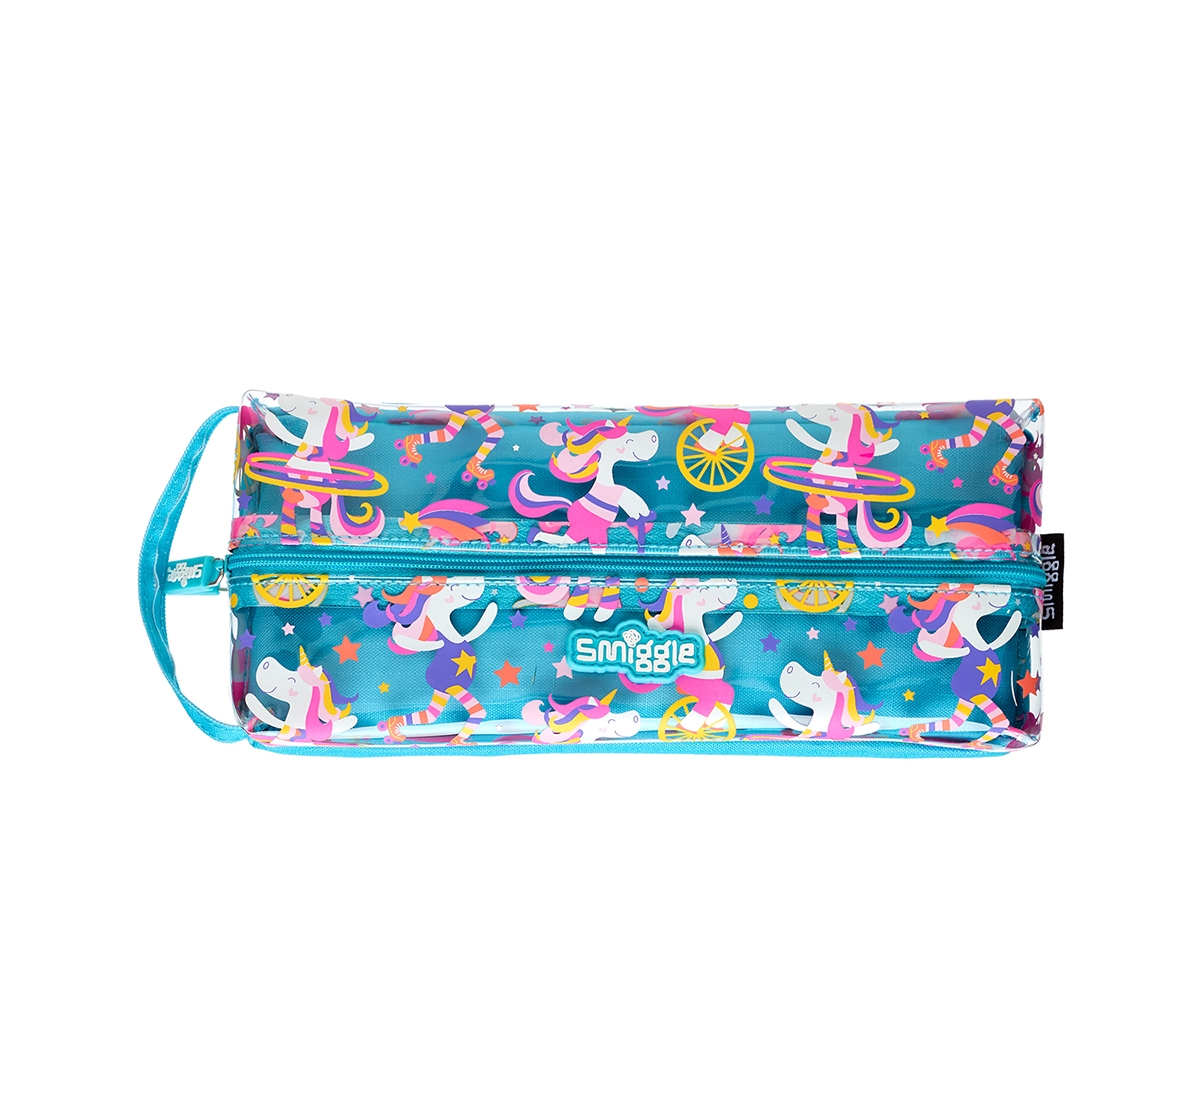 Smiggle | Smiggle Whirl Junior Flip Zip Pencil Case Unicorn Print Bags for Kids age 3Y+ (Mint)